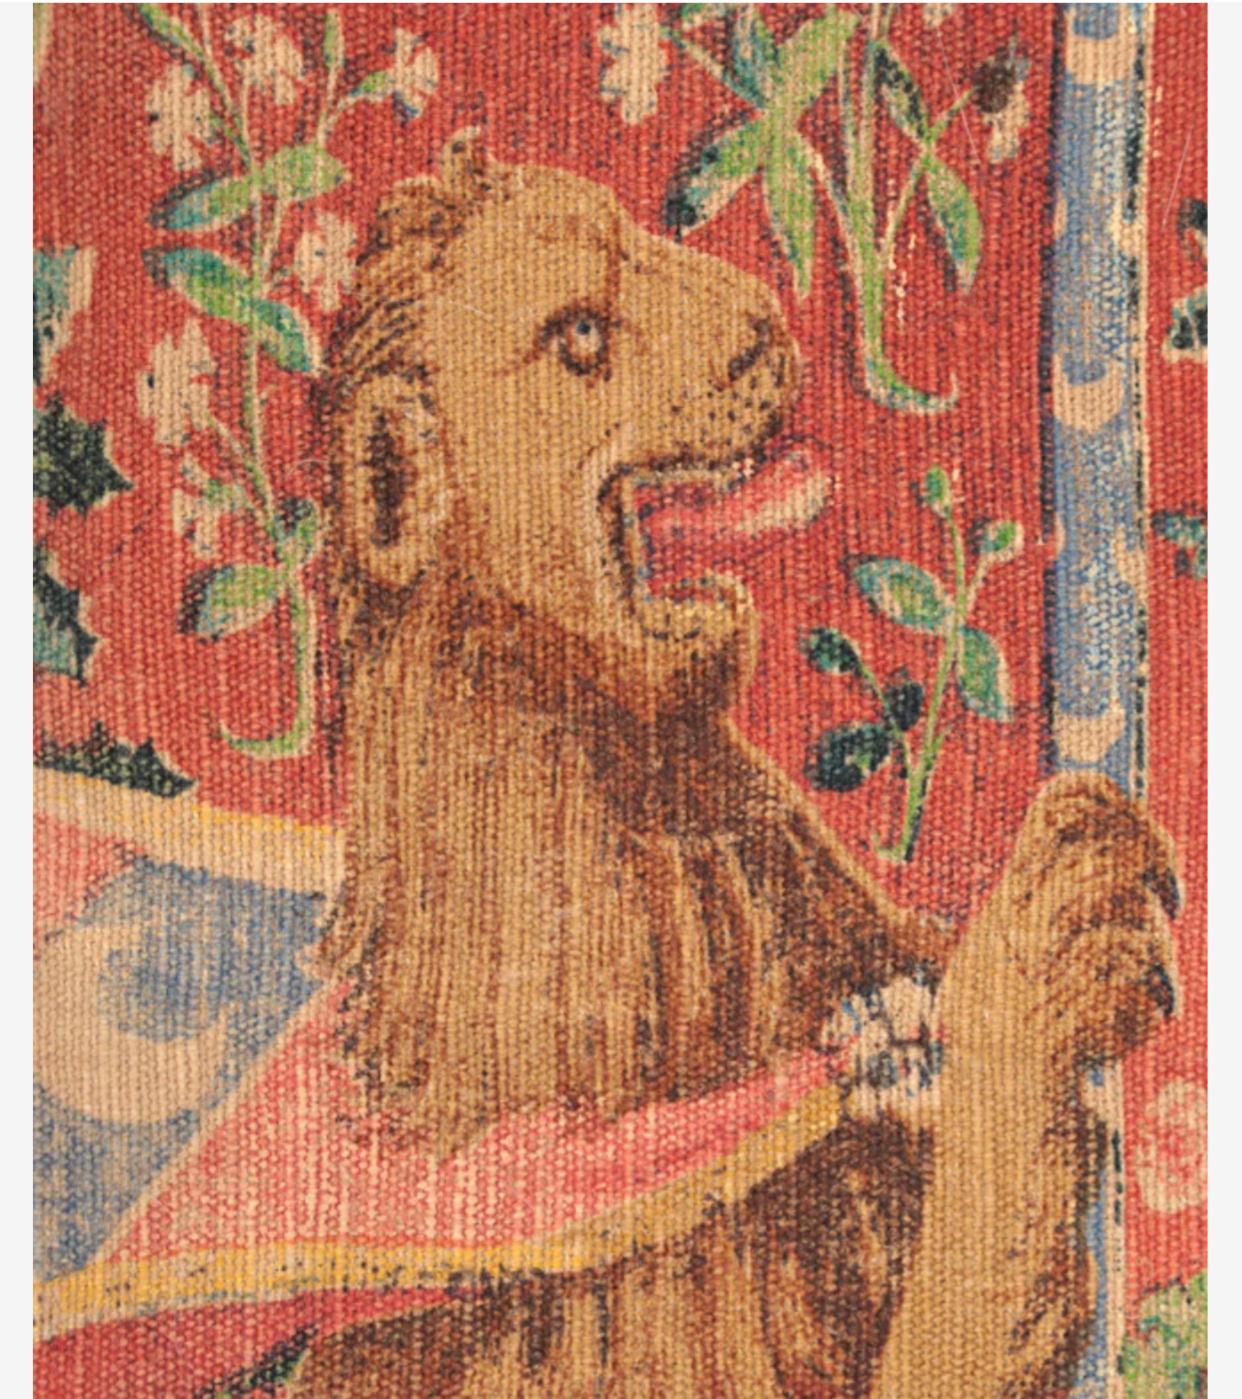 French Editions d’Art de Rambouillet Printed Tapestry after 